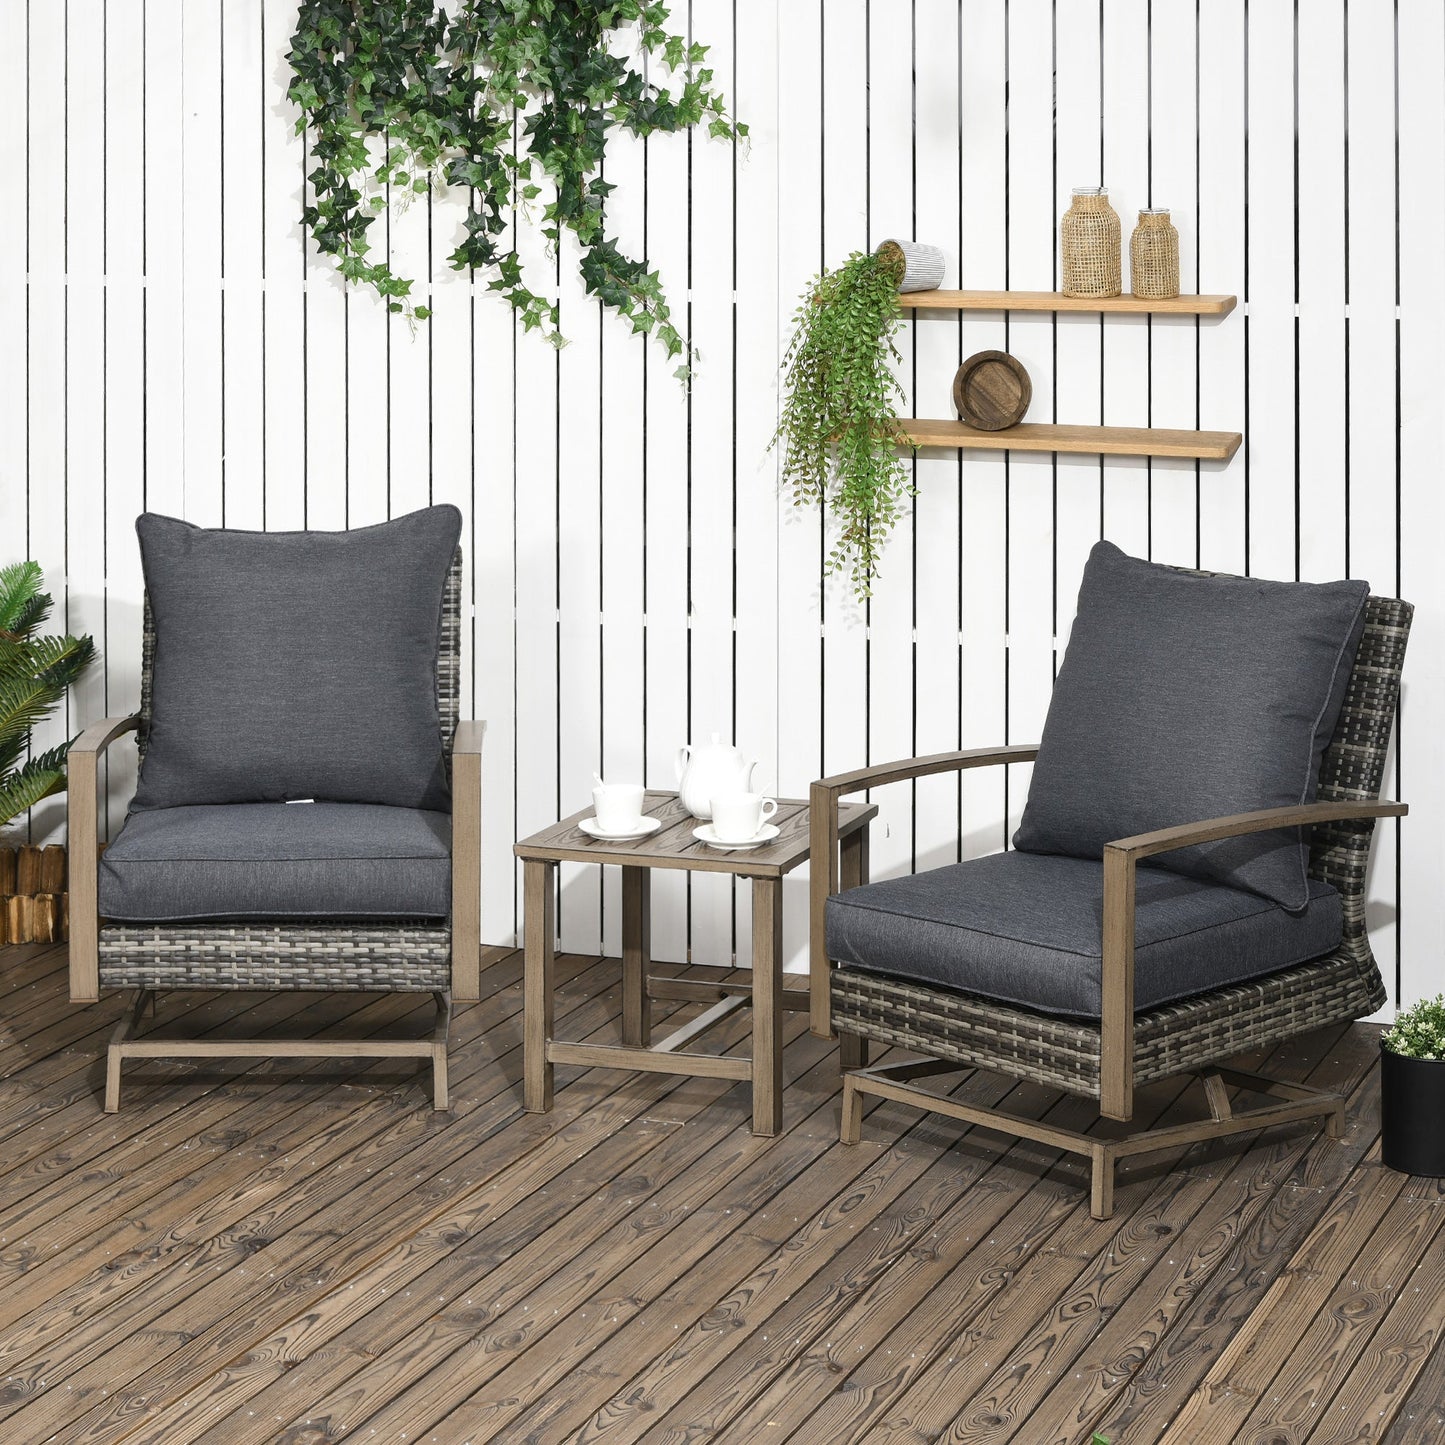 Outdoor and Garden-Patio Bistro Set, Porch Furniture with Soft Cushions and Rocking Function for Yard, Lawn, Porch, Dark Gray - Outdoor Style Company